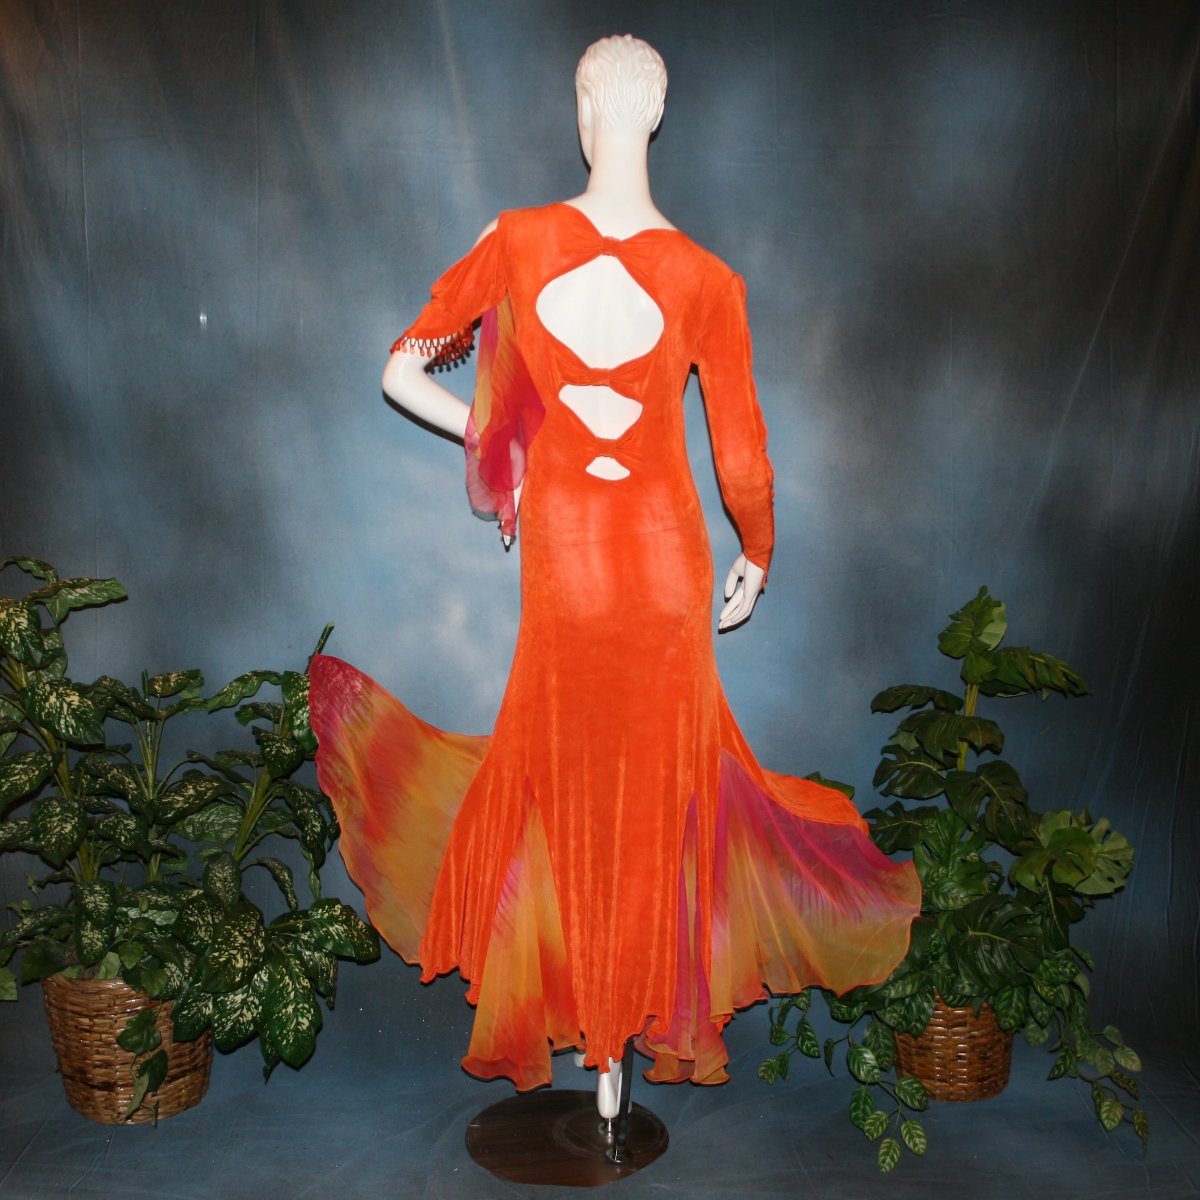 back view of Orange social ballroom dress created in luxurious solid slinky fabric with chiffon insets of rainbow oranges & yellows, with hand beading on arm draping. Very full around bottom, and makes a great beginner ballroom dancer smooth dress.